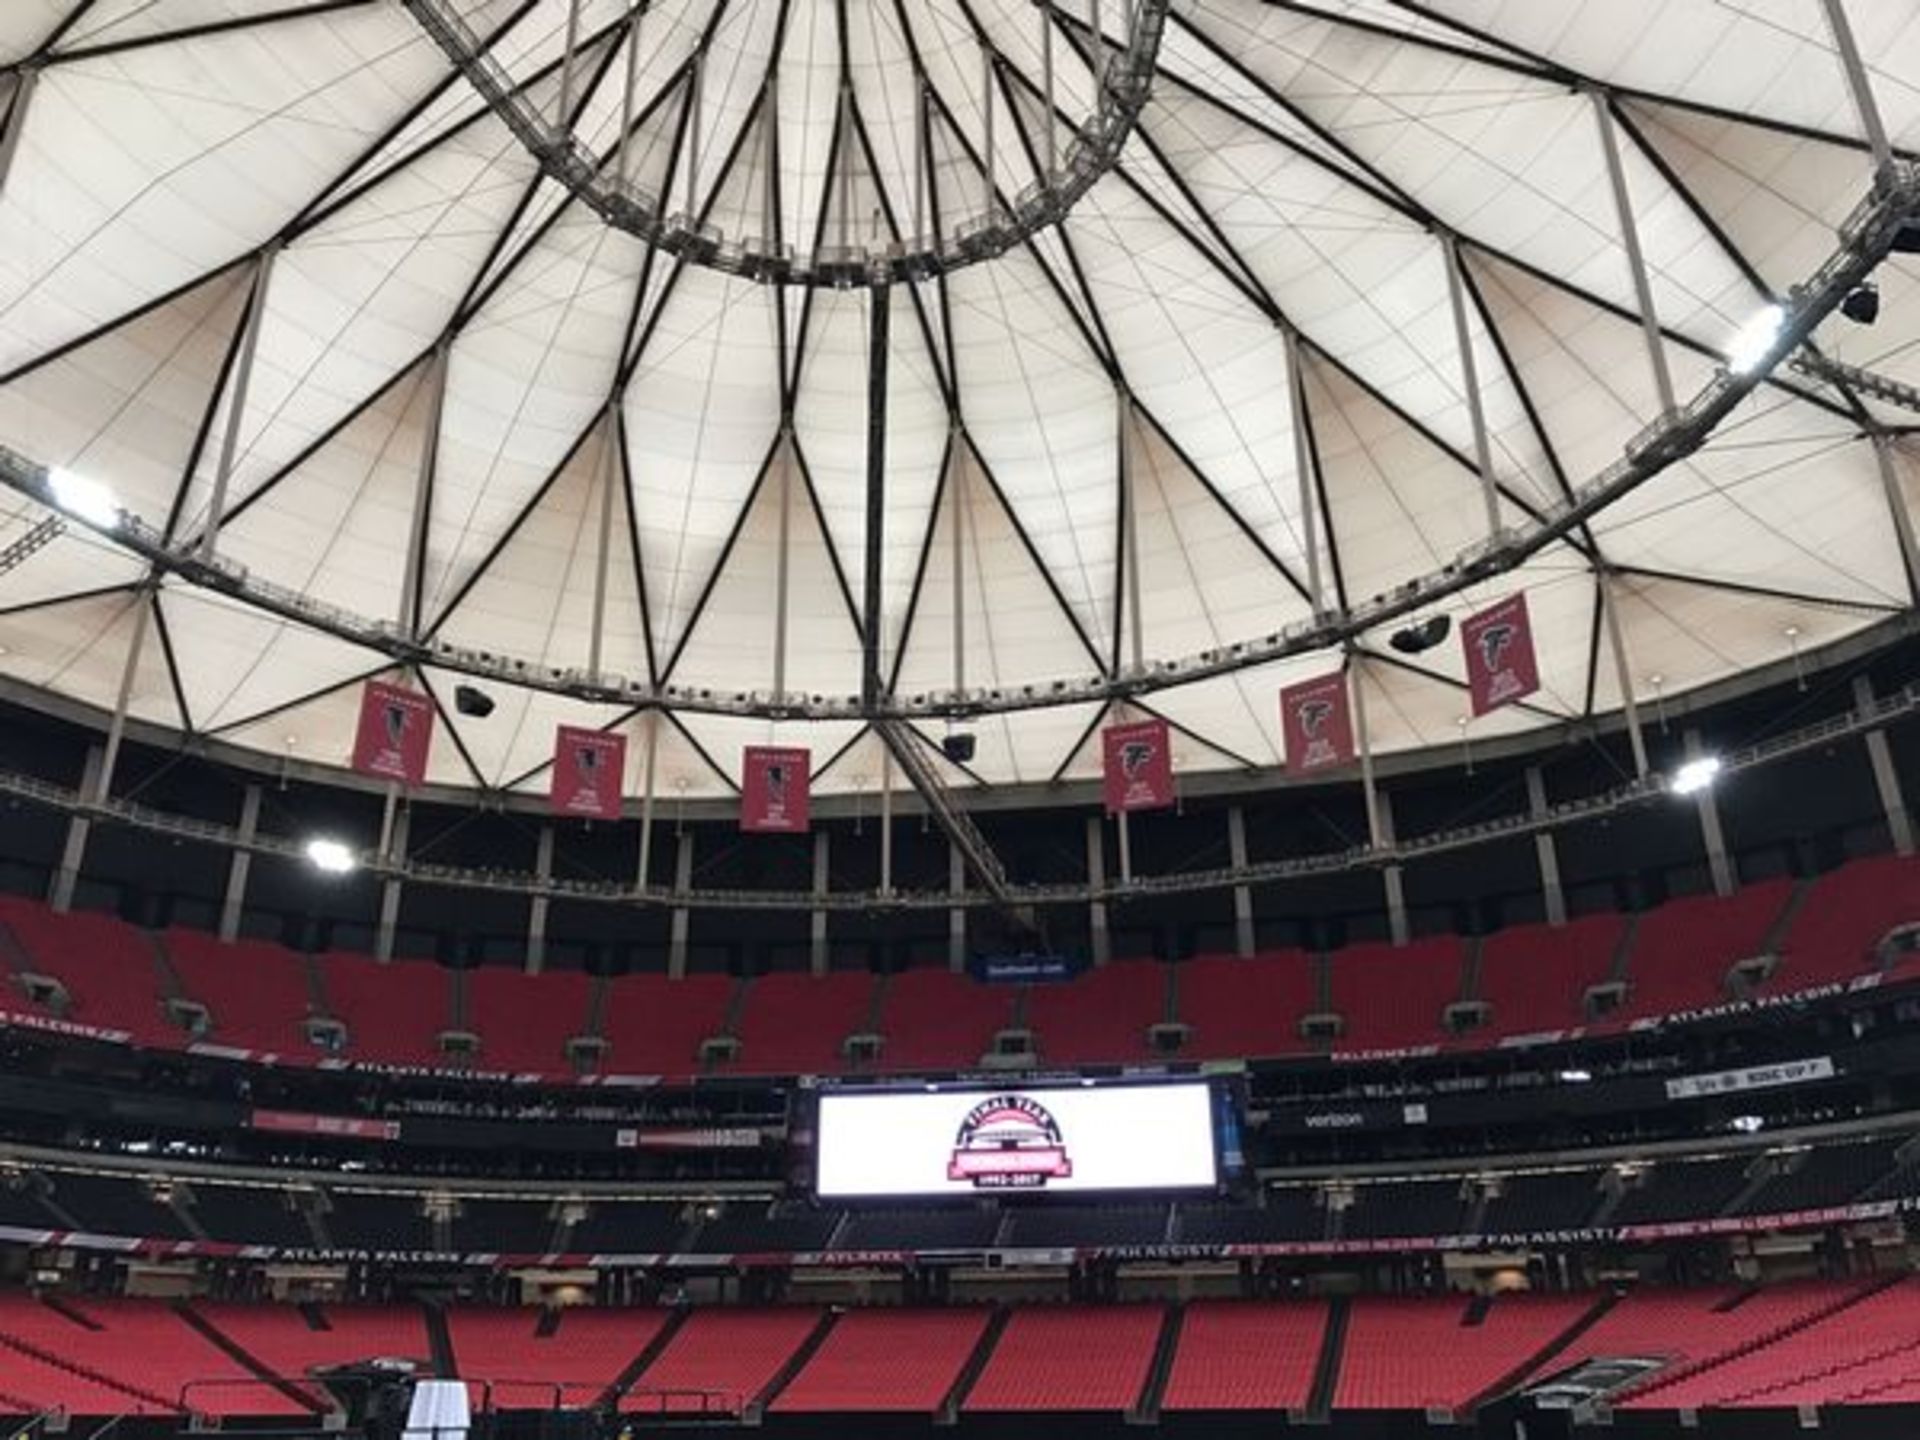 2004 NFC SOUTH, FALCONS CHAMPIONS BANNER / Authentic & Historic Banner Hung in GA Dome Rafters / - Image 2 of 2